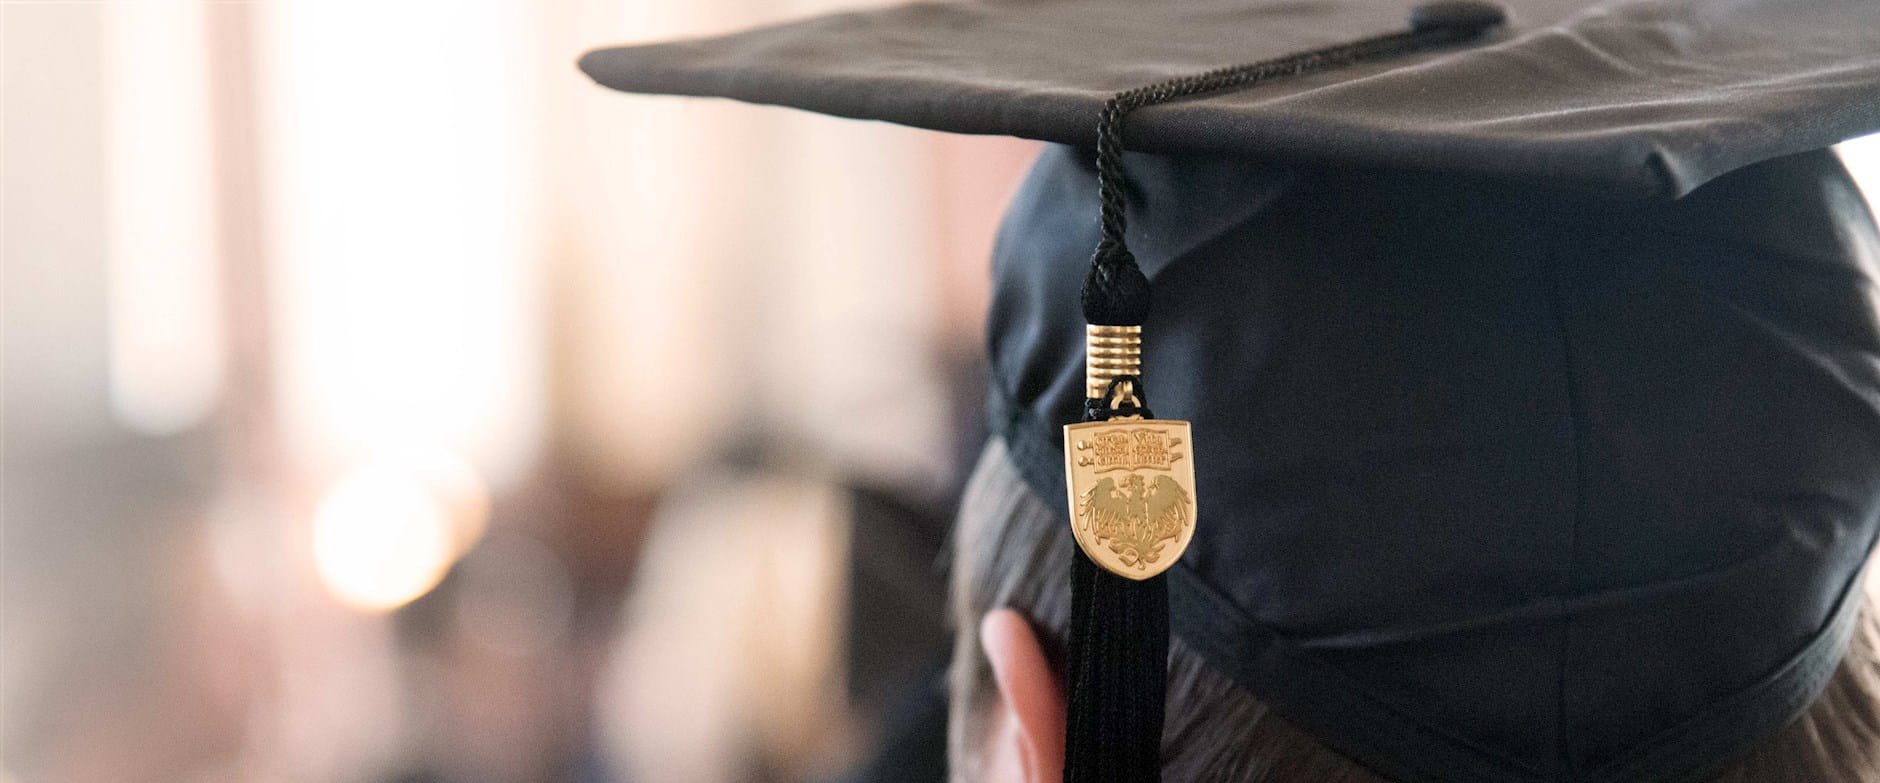 Close-up of a Chicago Booth graduation cap with gold university seal visibile on the tassel; the hat is being worn by a graduate